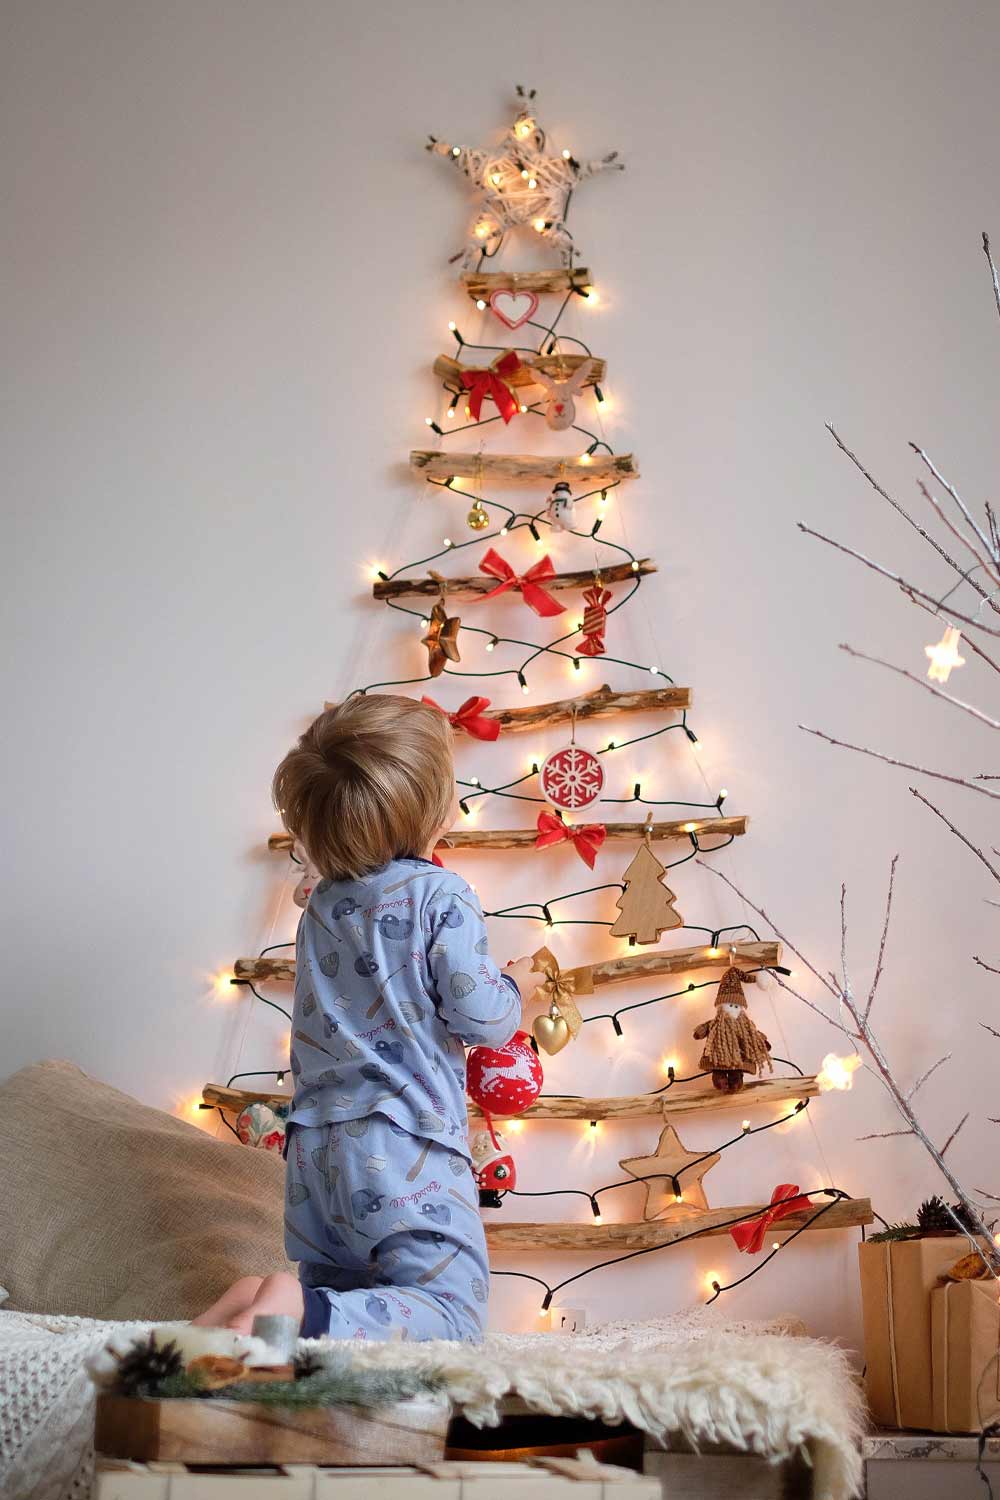 Cute Wall Christmas Tree with Leg Garlands